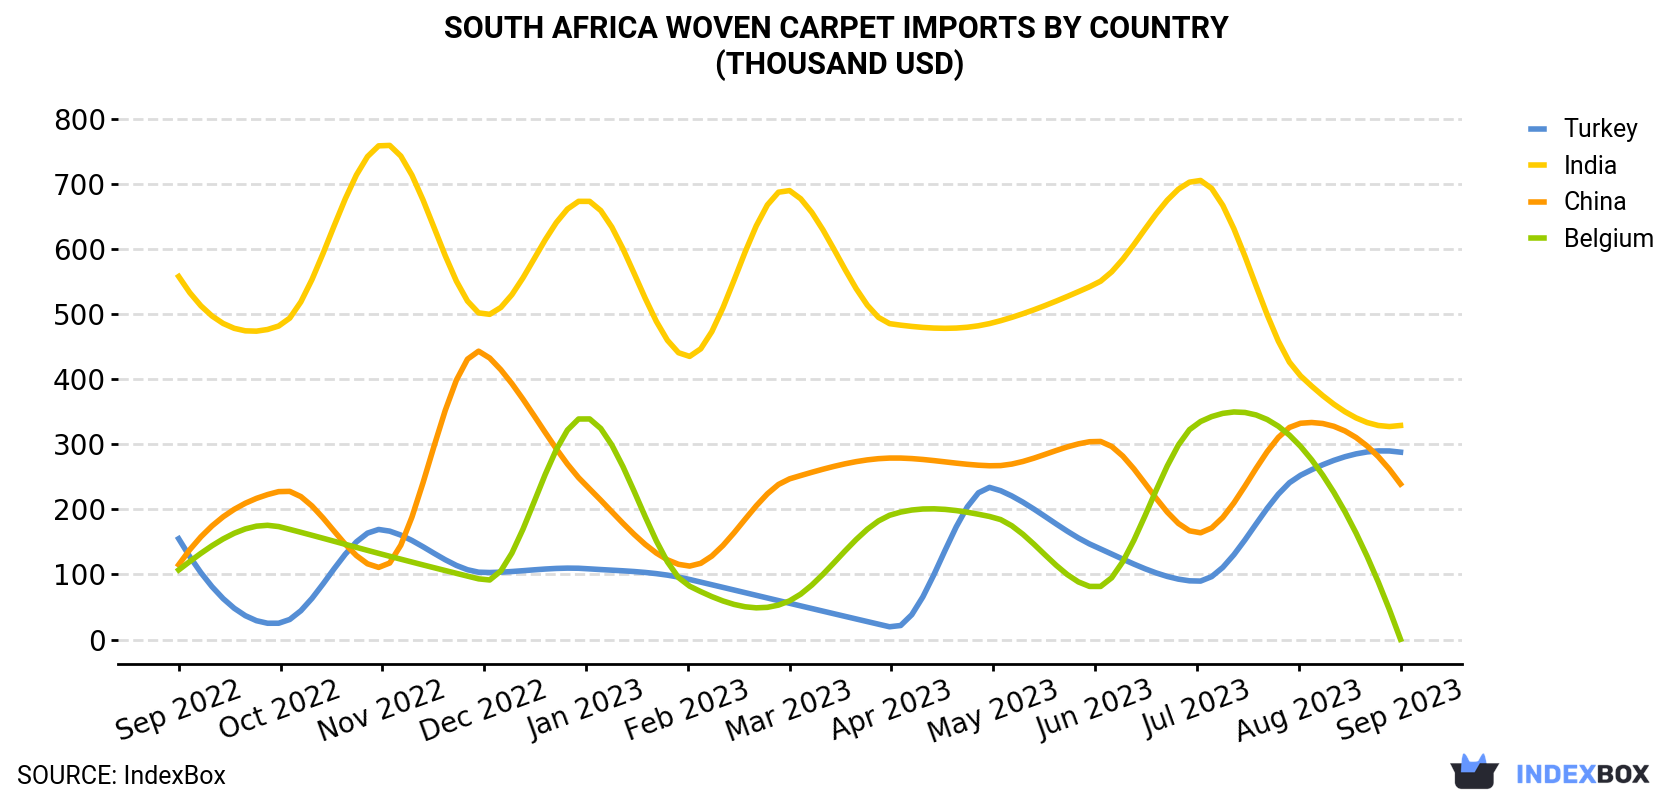 South Africa Woven Carpet Imports By Country (Thousand USD)